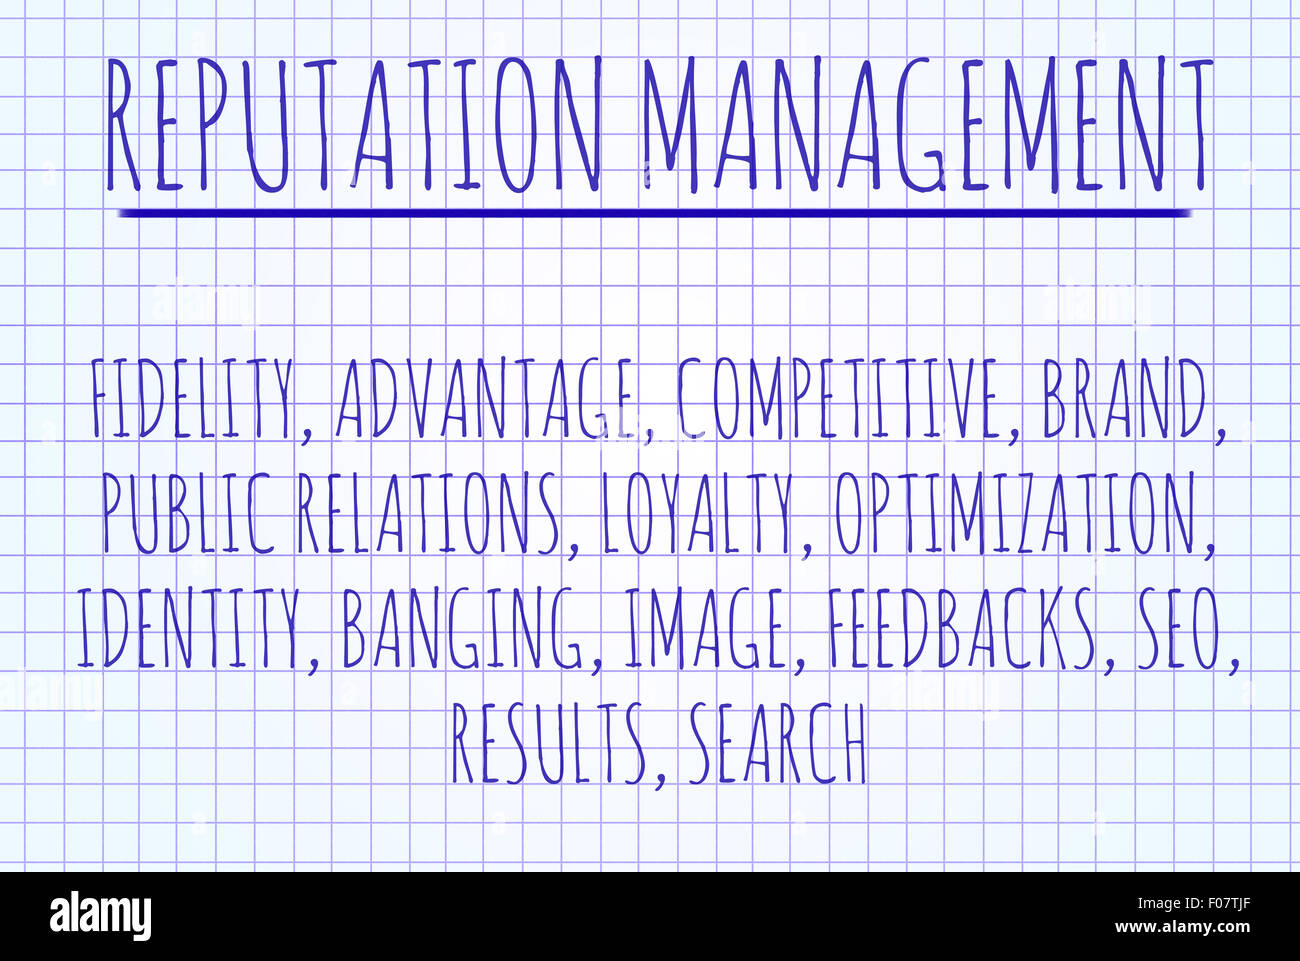 Reputation management word cloud written on a piece of paper Stock Photo